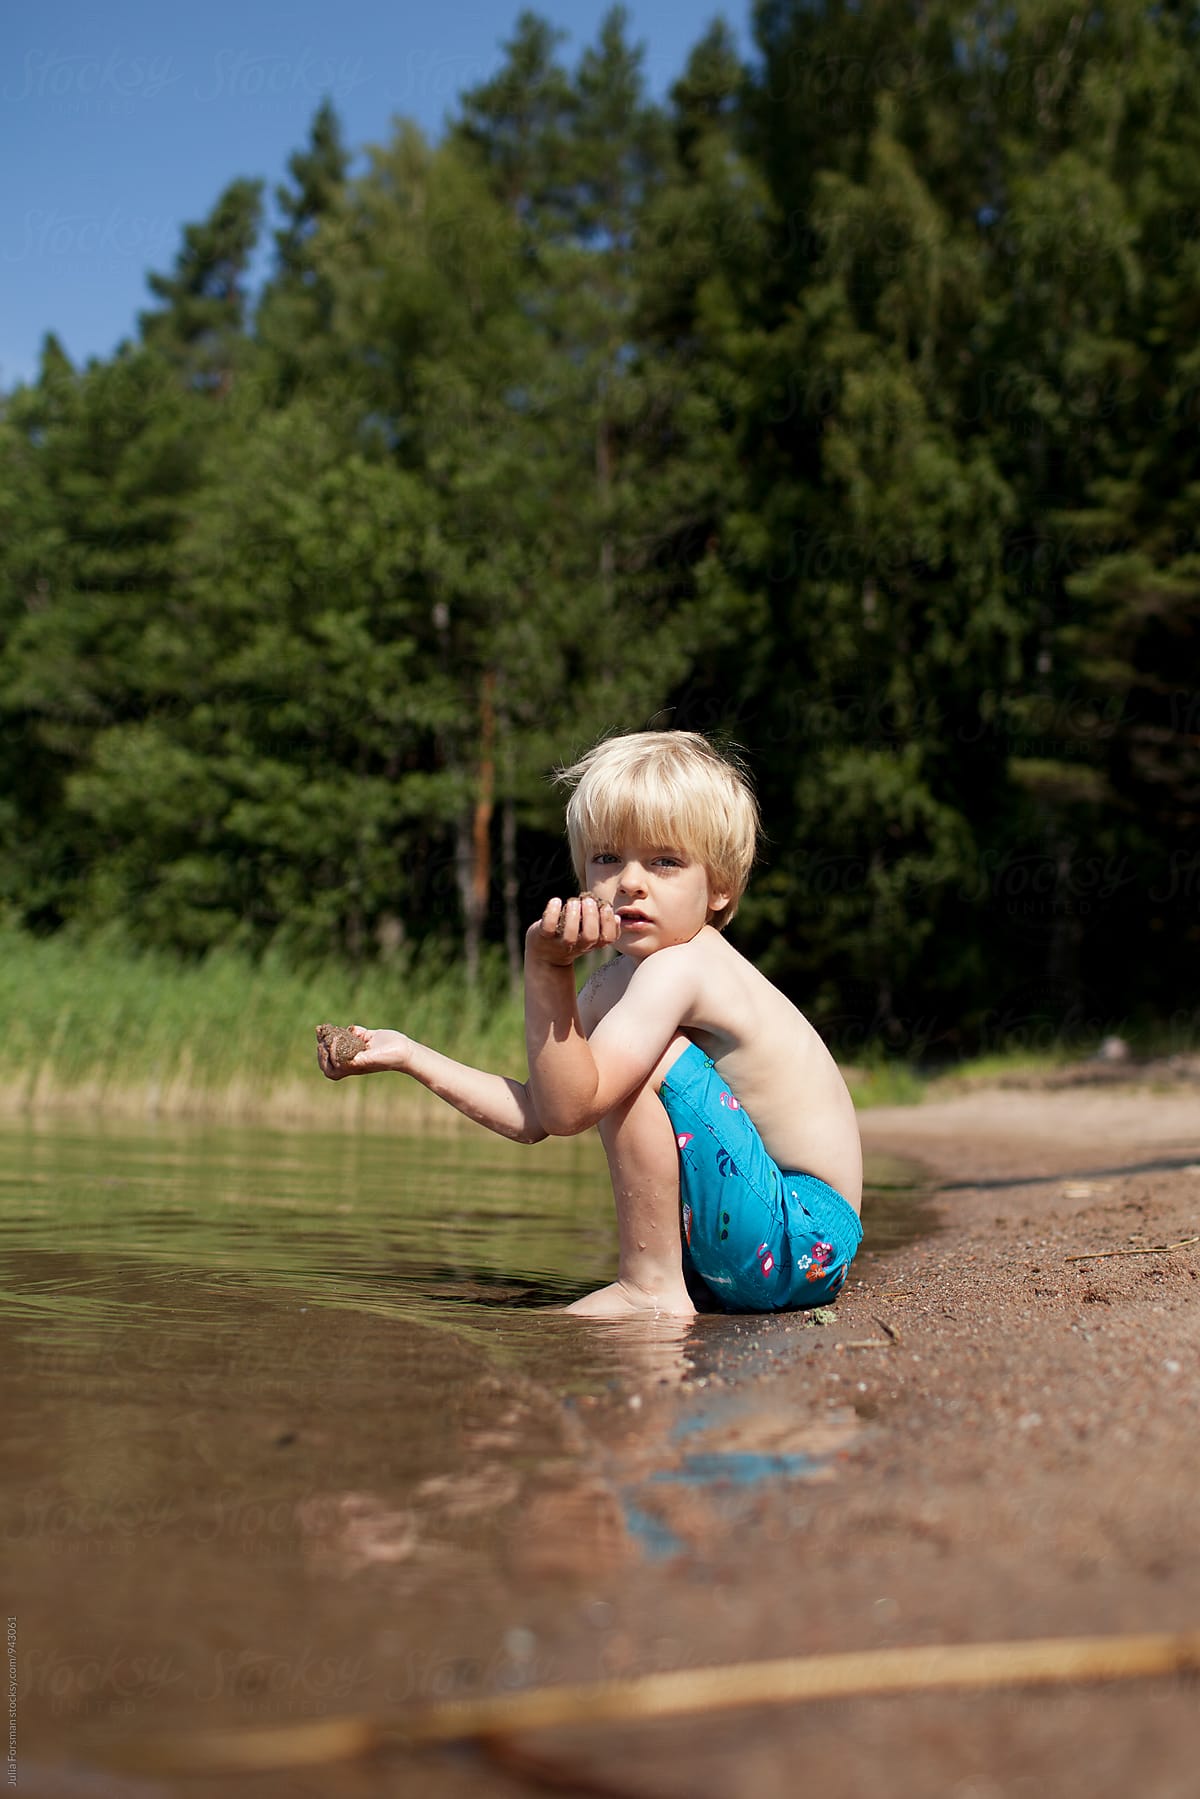 Scandinavian child sitting on a beach with forest behind him.